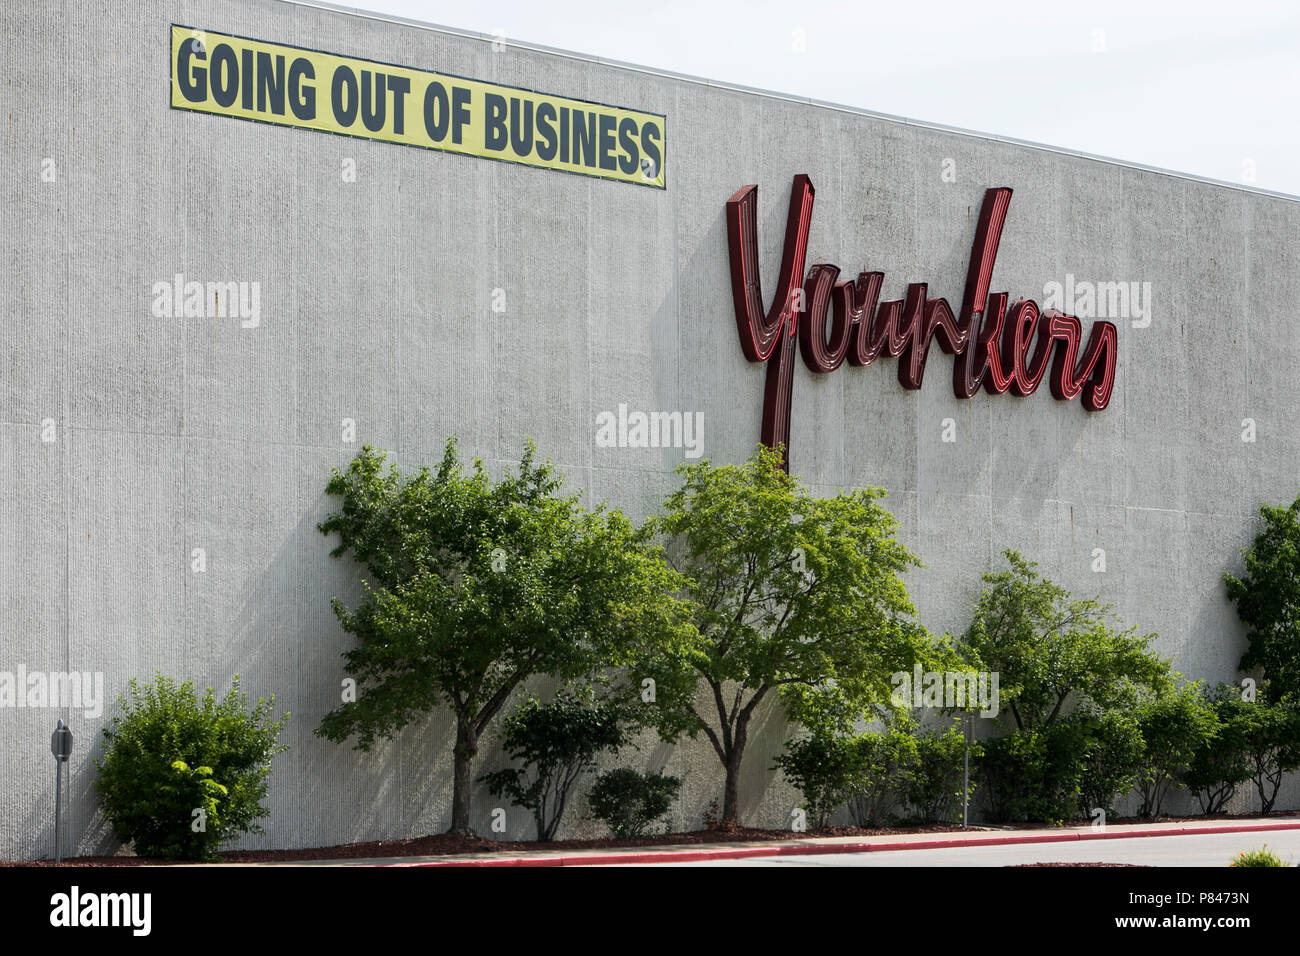 A logo sign and 'Going Out Of Business' banner outside of Younkers retail department store in West Des Moines, Iowa, on June 30, 2018. Stock Photo